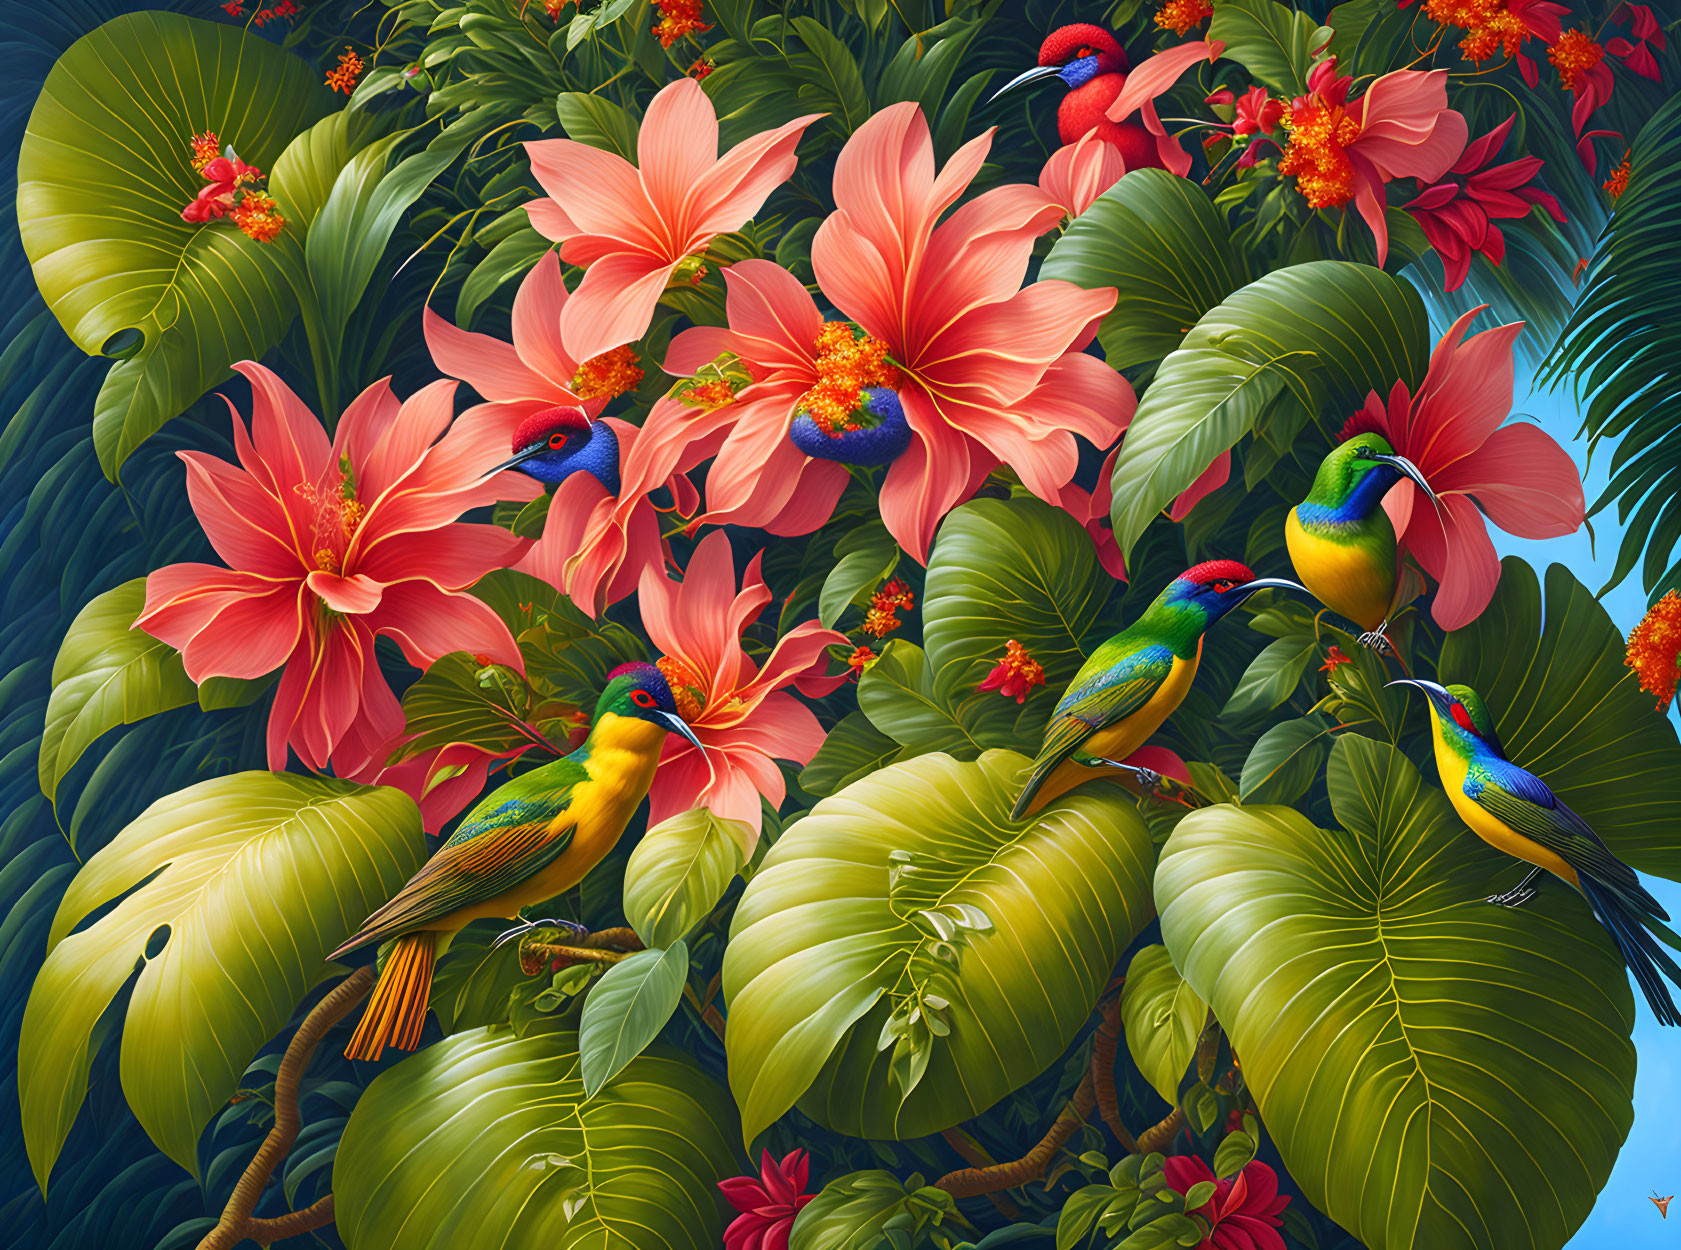 Colorful Birds in Lush Tropical Setting